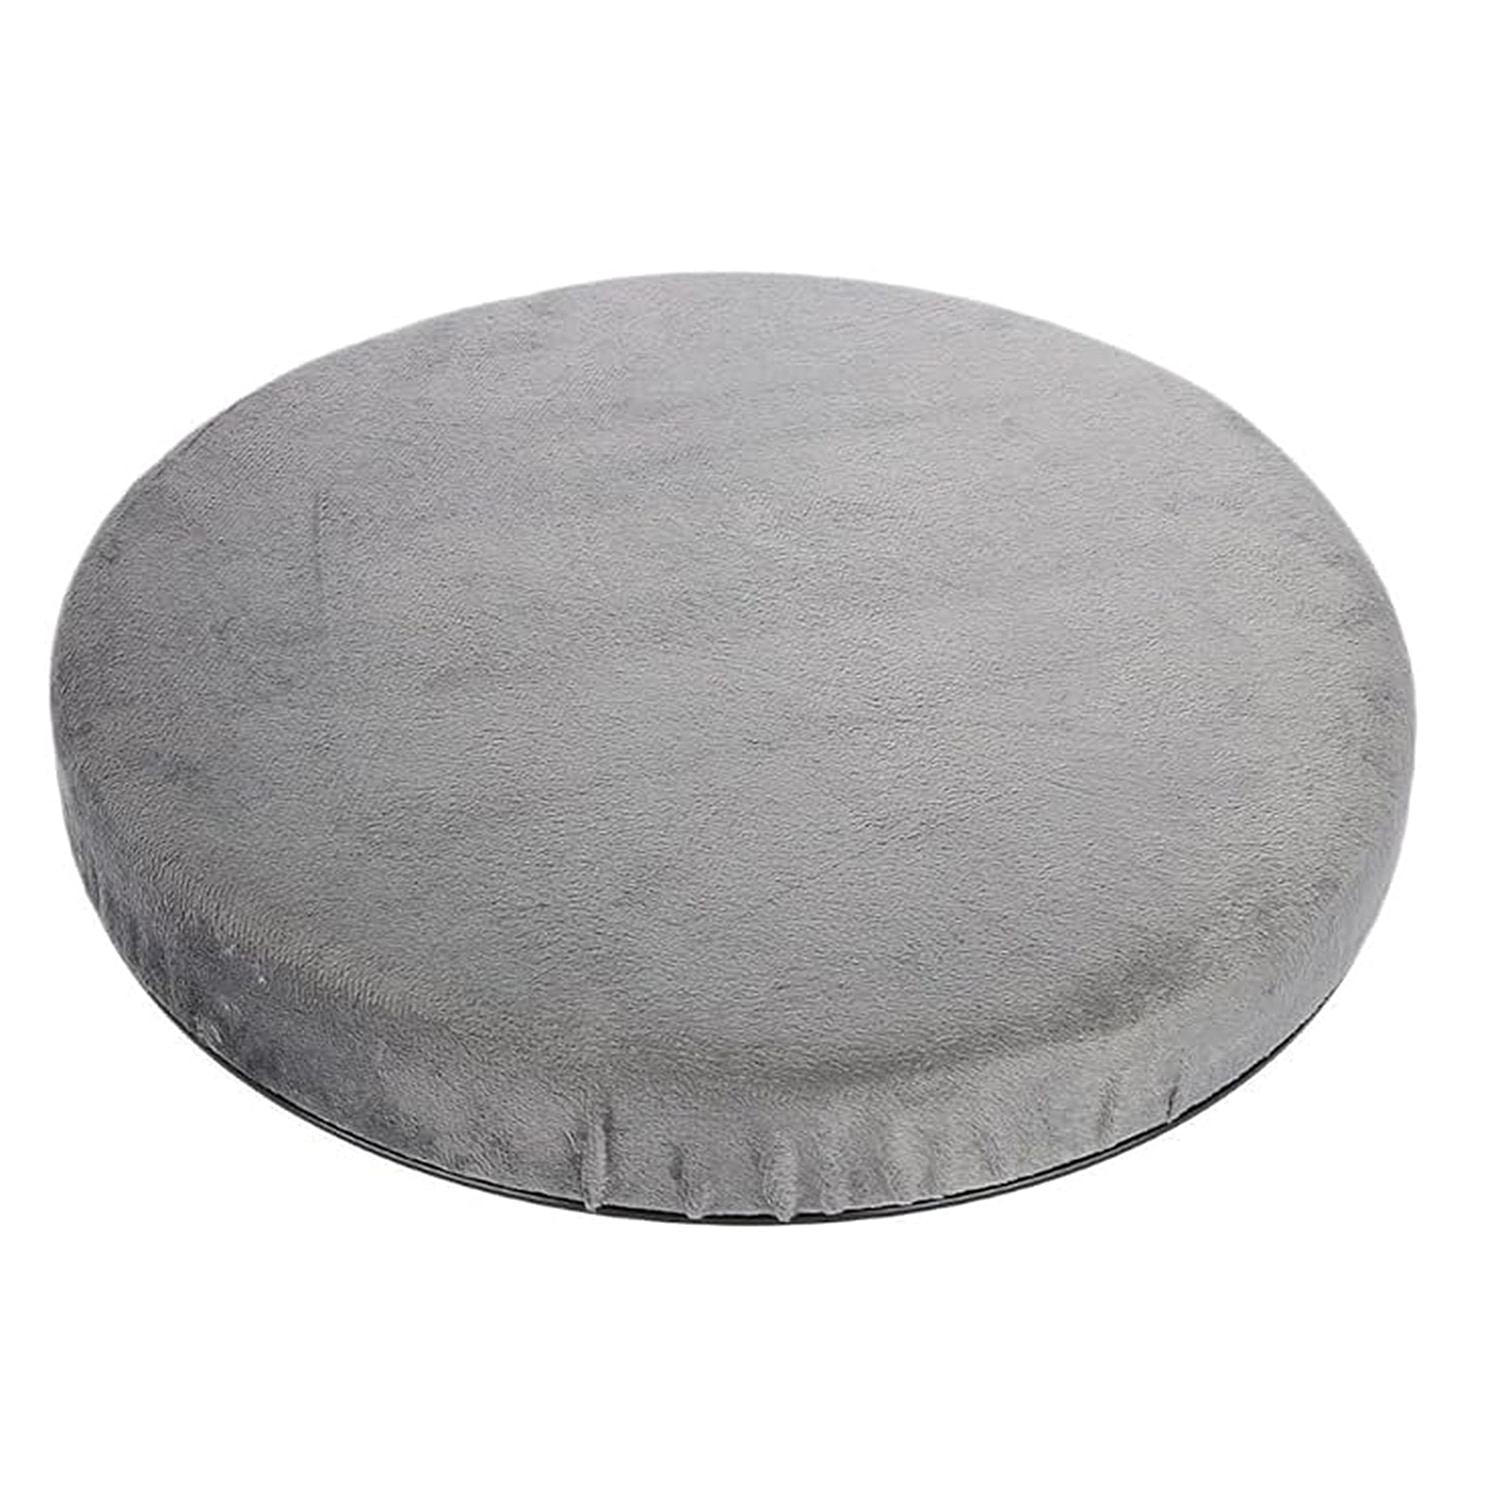 360 Degree Rotating Base Flexible Gel Seat Cushion - Breathable & Washable With Cover.